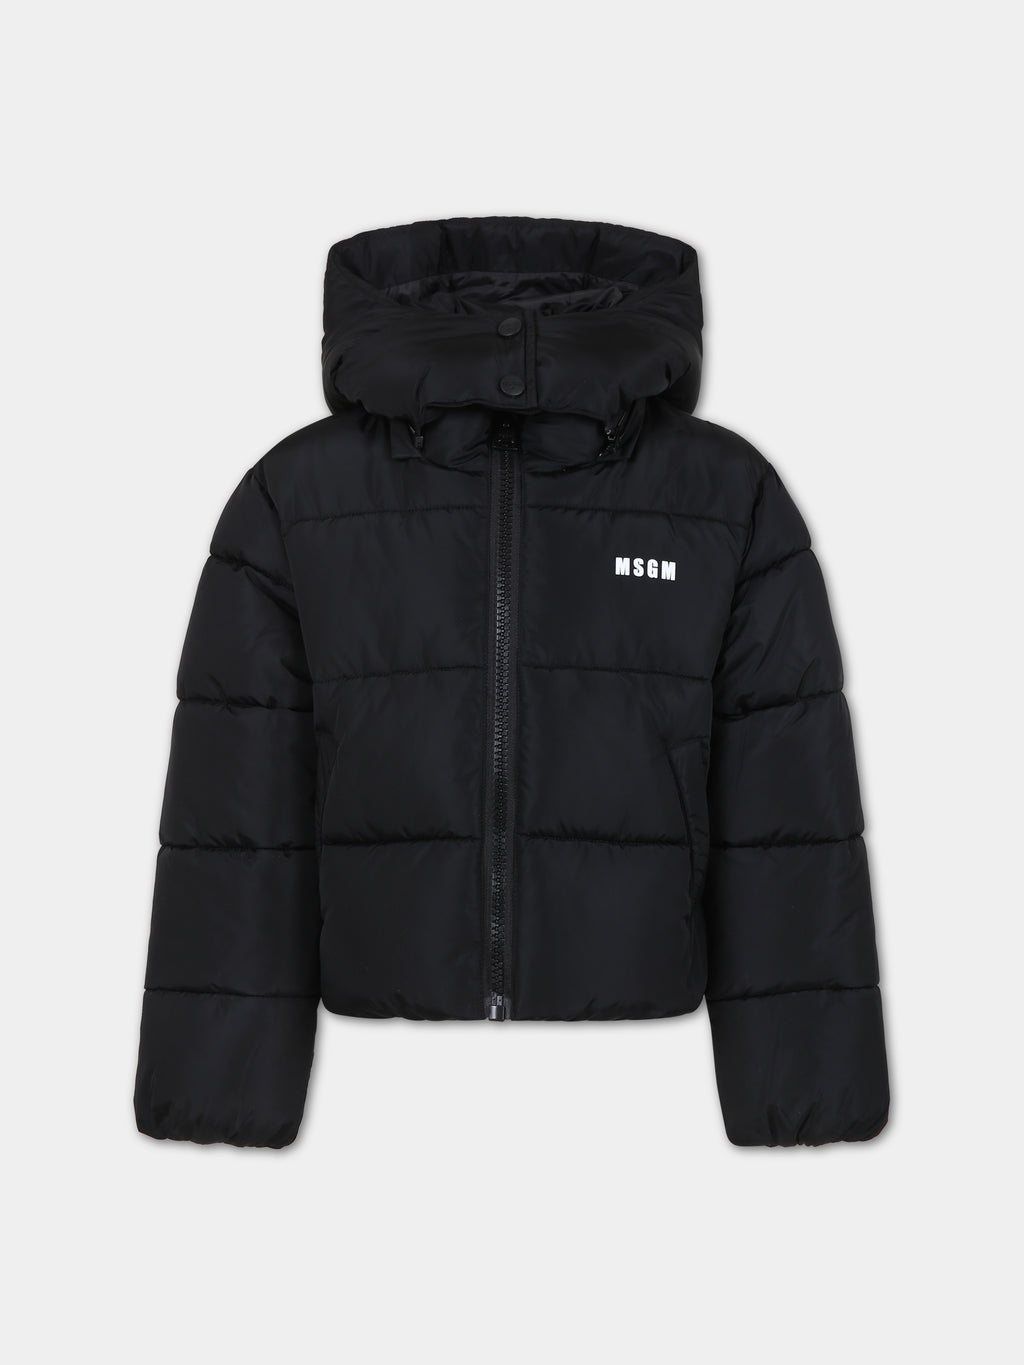 Black down jacket for girl with logo and star